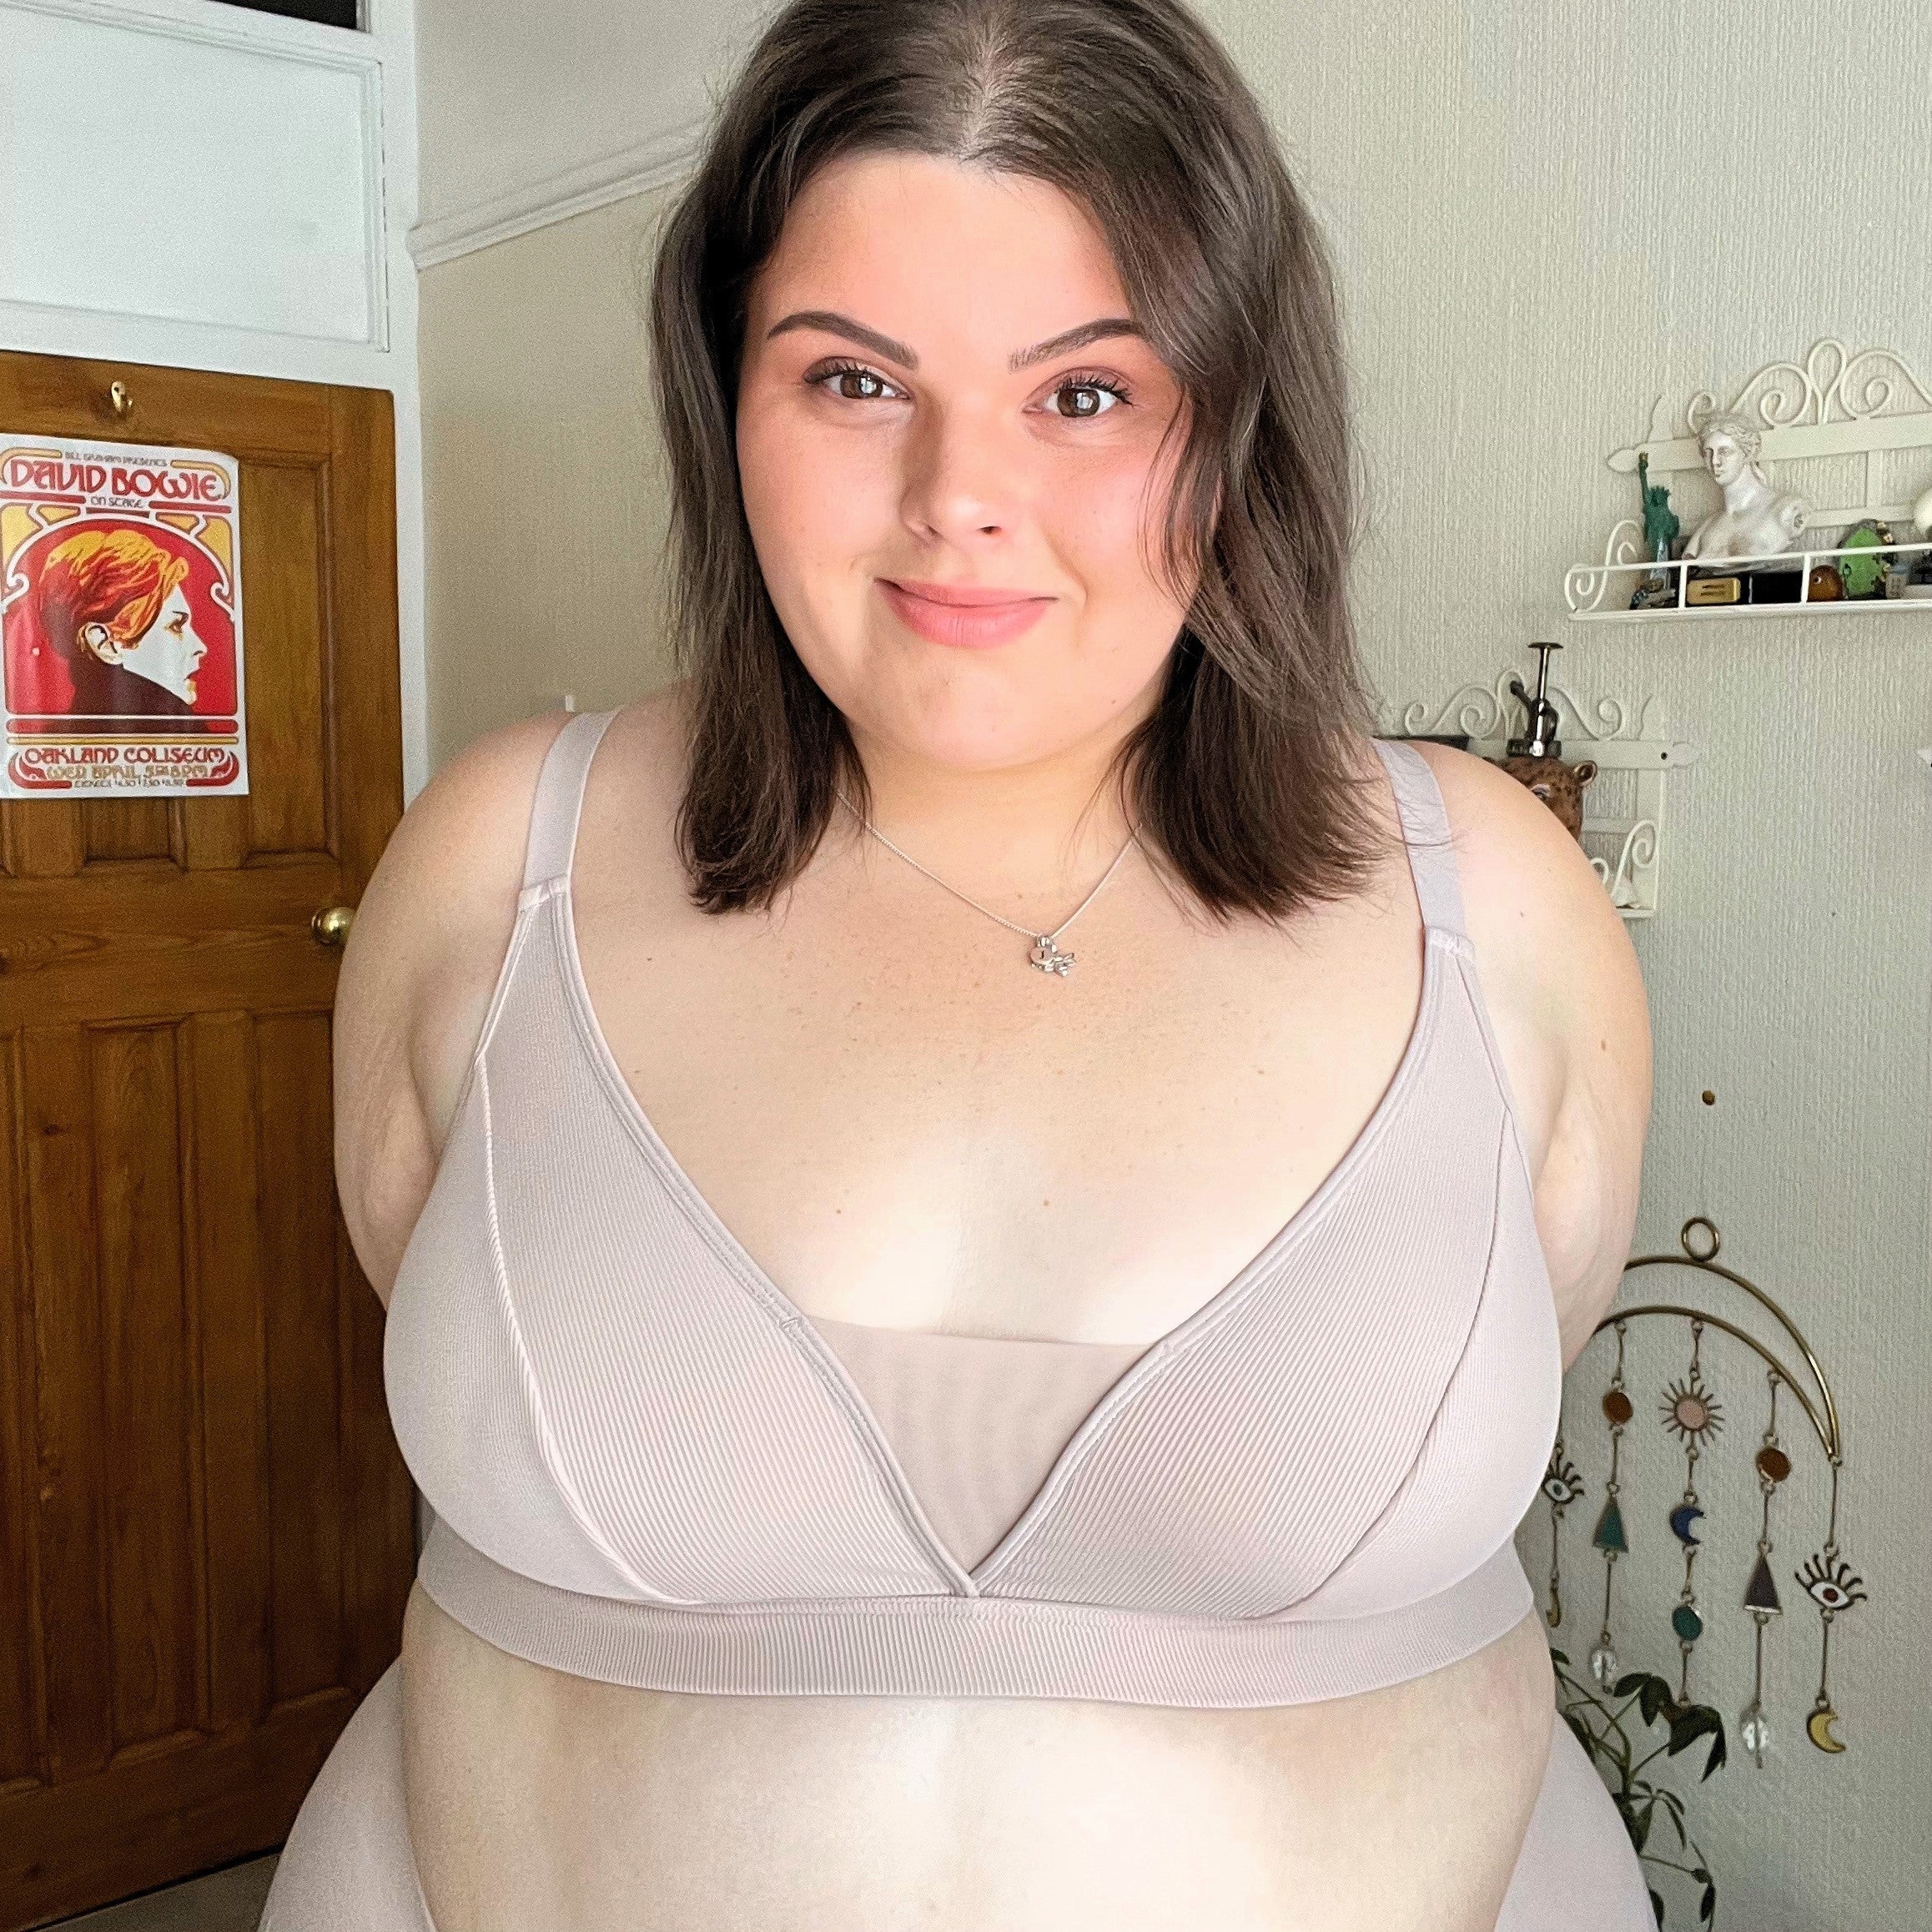 Sugar Candy Bras - Non-Wired Bralettes for Curvy Ladies